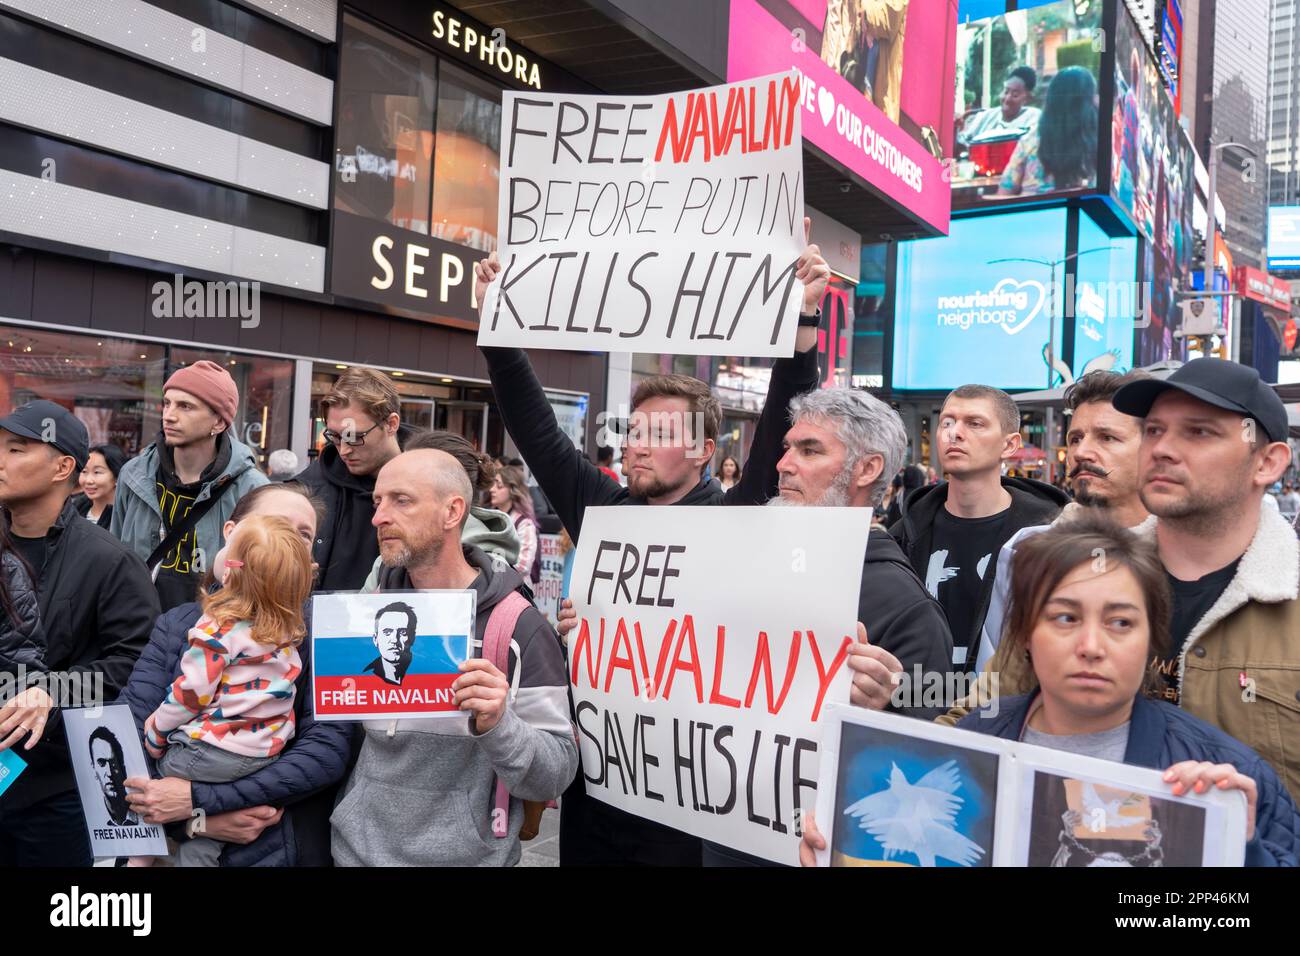 New York, United States. 21st Apr, 2023. Protesters hold placards that demand the freedom of Alexei Navalny during a demonstration in New York. Protesters take to Times Square to demonstrate were Russians speaking activists voice outrage over Vladimir Putin's rule and the jailing of Russian opposition leader Alexei Navalny saying that Right now, Alexei is once again in mortal danger in New York City. (Photo by Ron Adar/SOPA Images/Sipa USA) Credit: Sipa USA/Alamy Live News Stock Photo